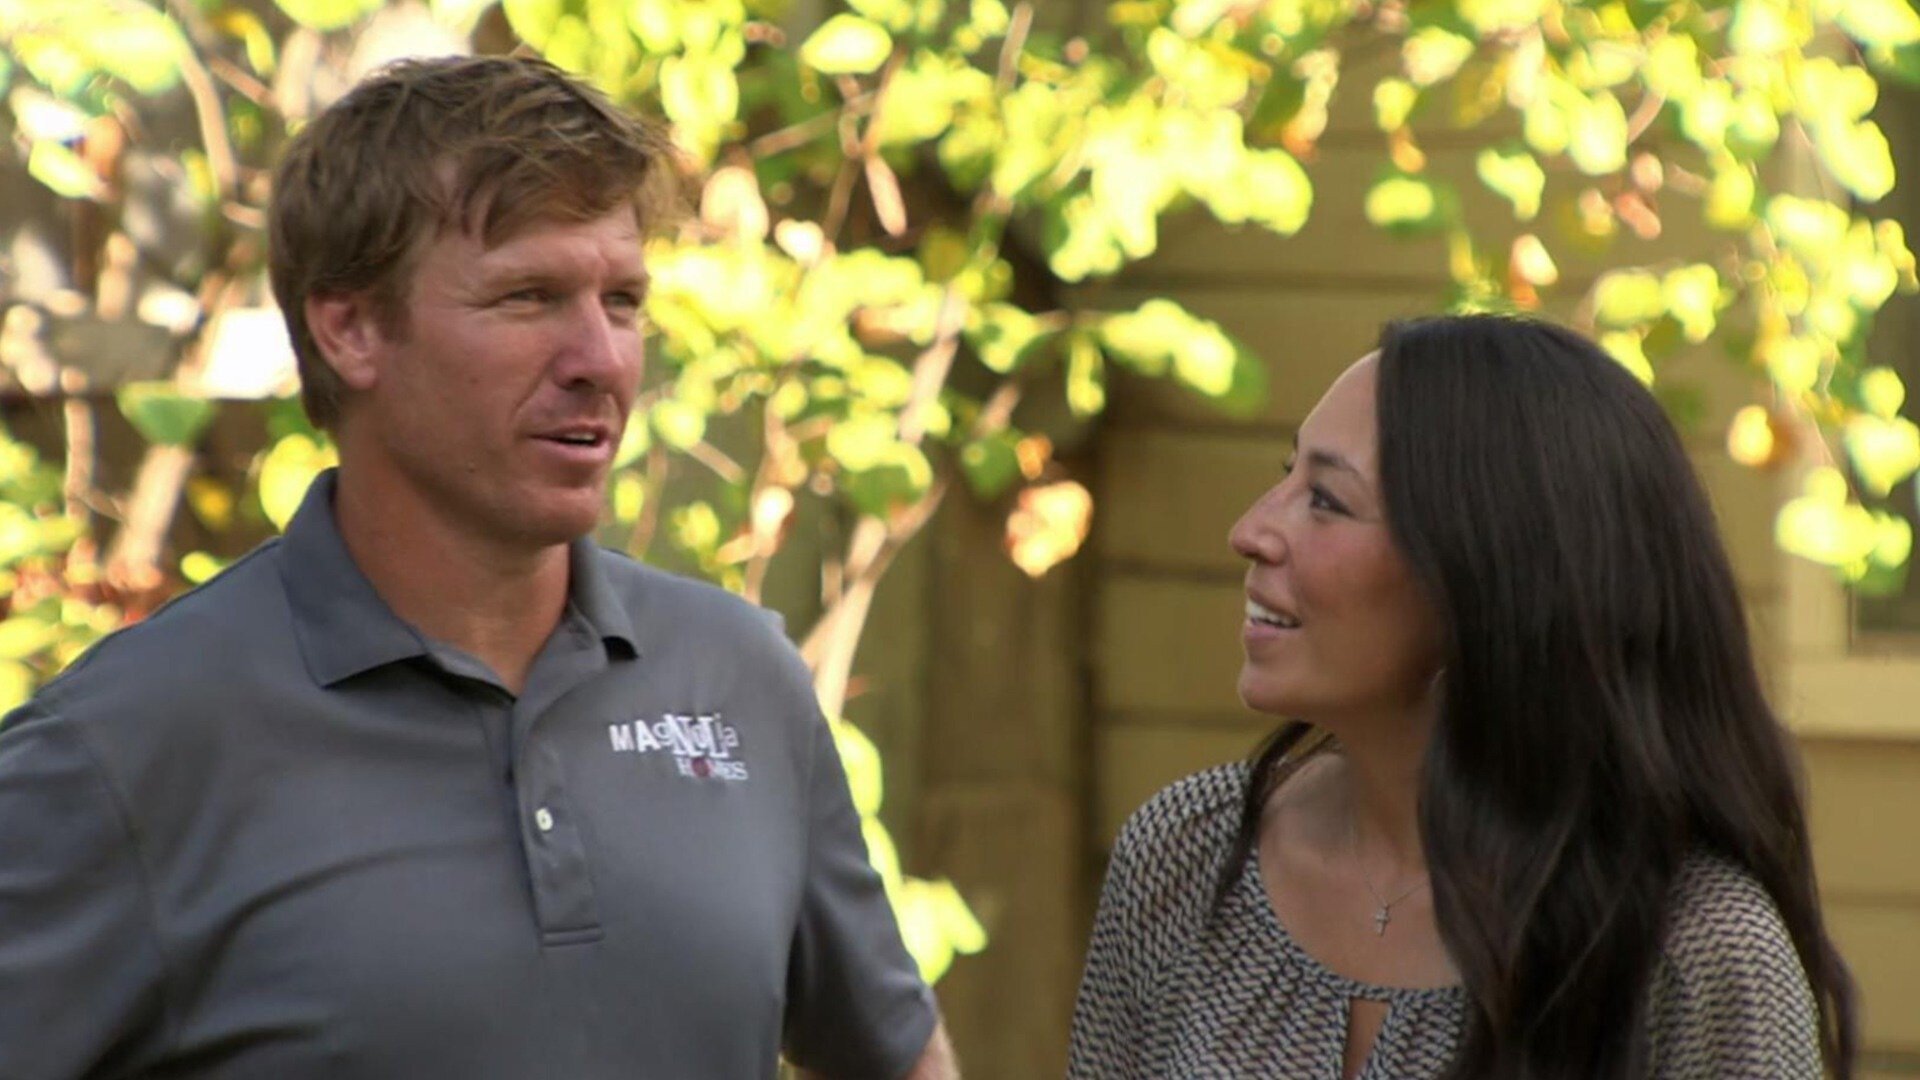 Fixer Upper S1E9 Missionaries Enlist Kids to Find Retreat in Their Hometown of Waco, Texas